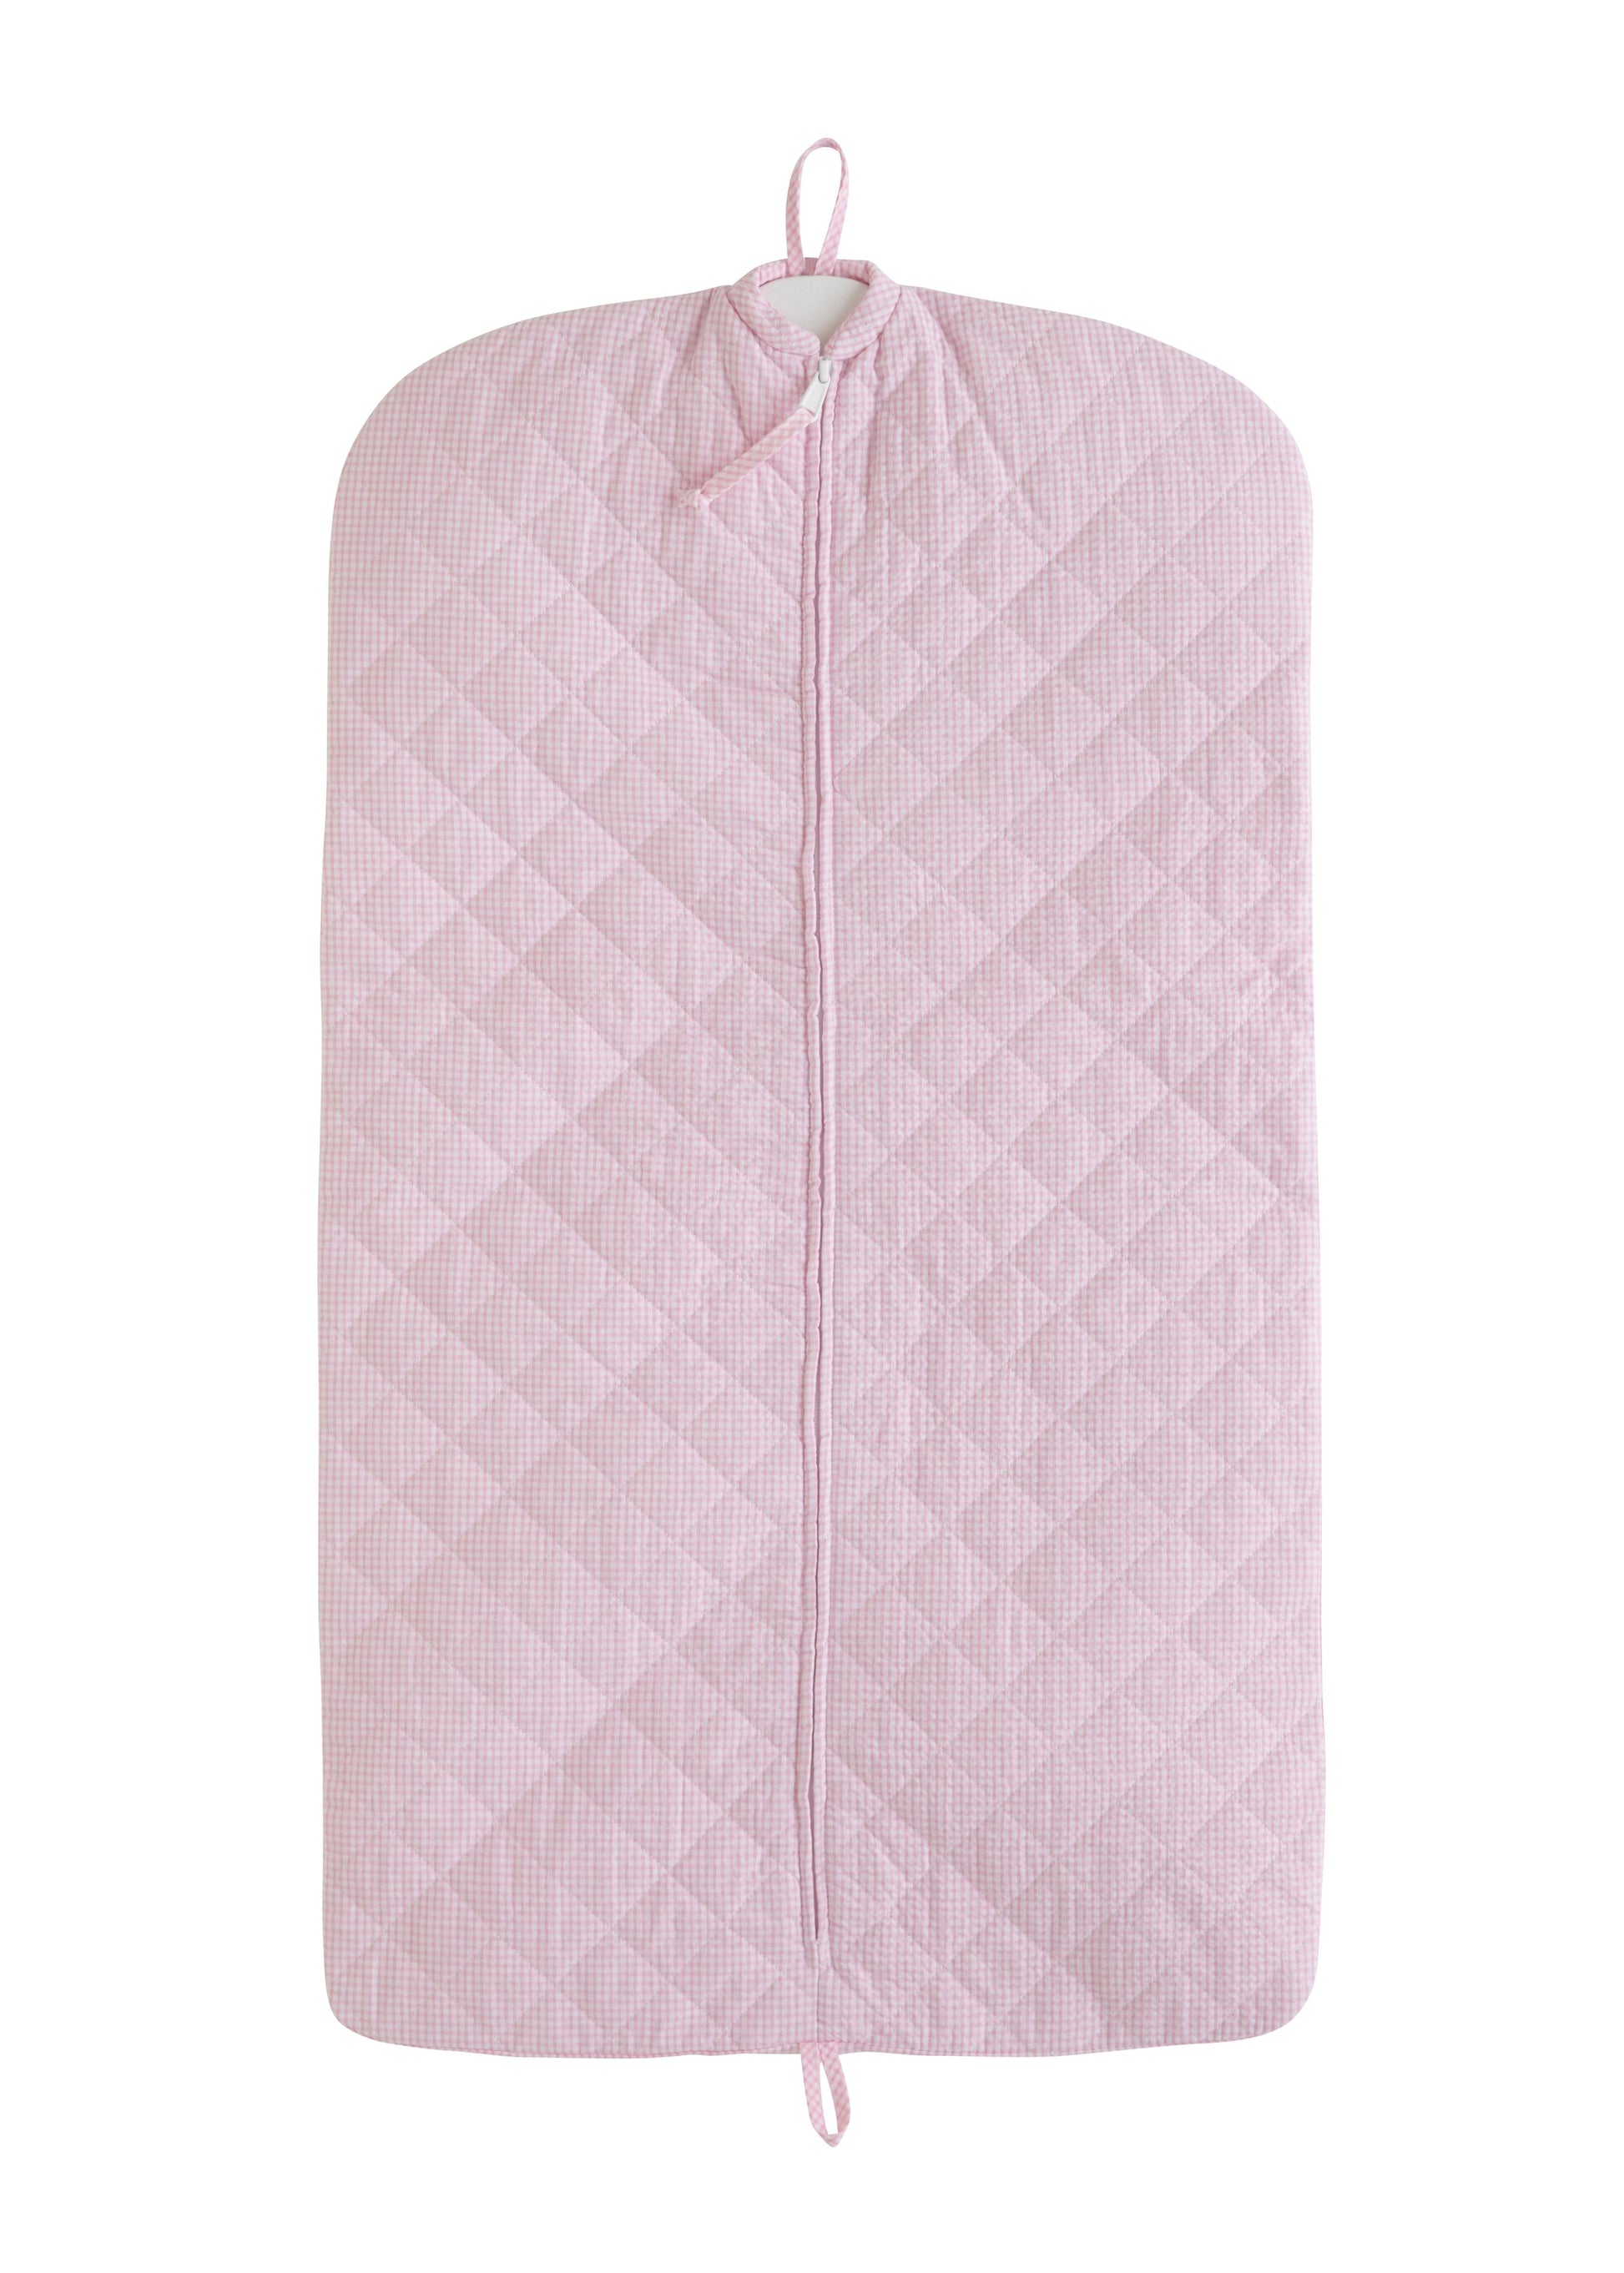 Little English Quilted Luggage - Light Pink Baby Garment Bag